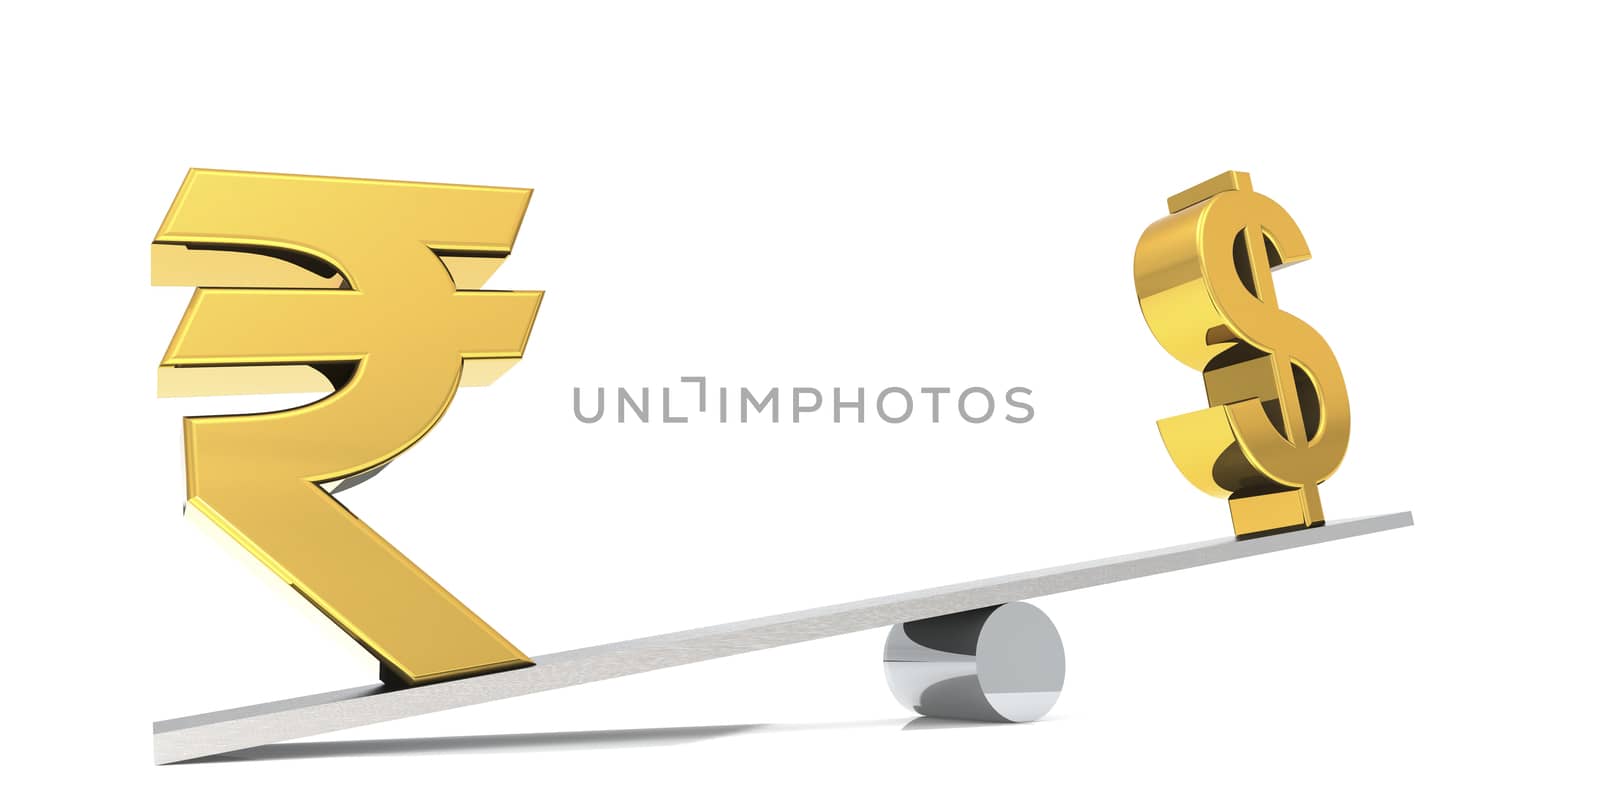 India rupee and dollar sign on the balance bar, 3D rendering